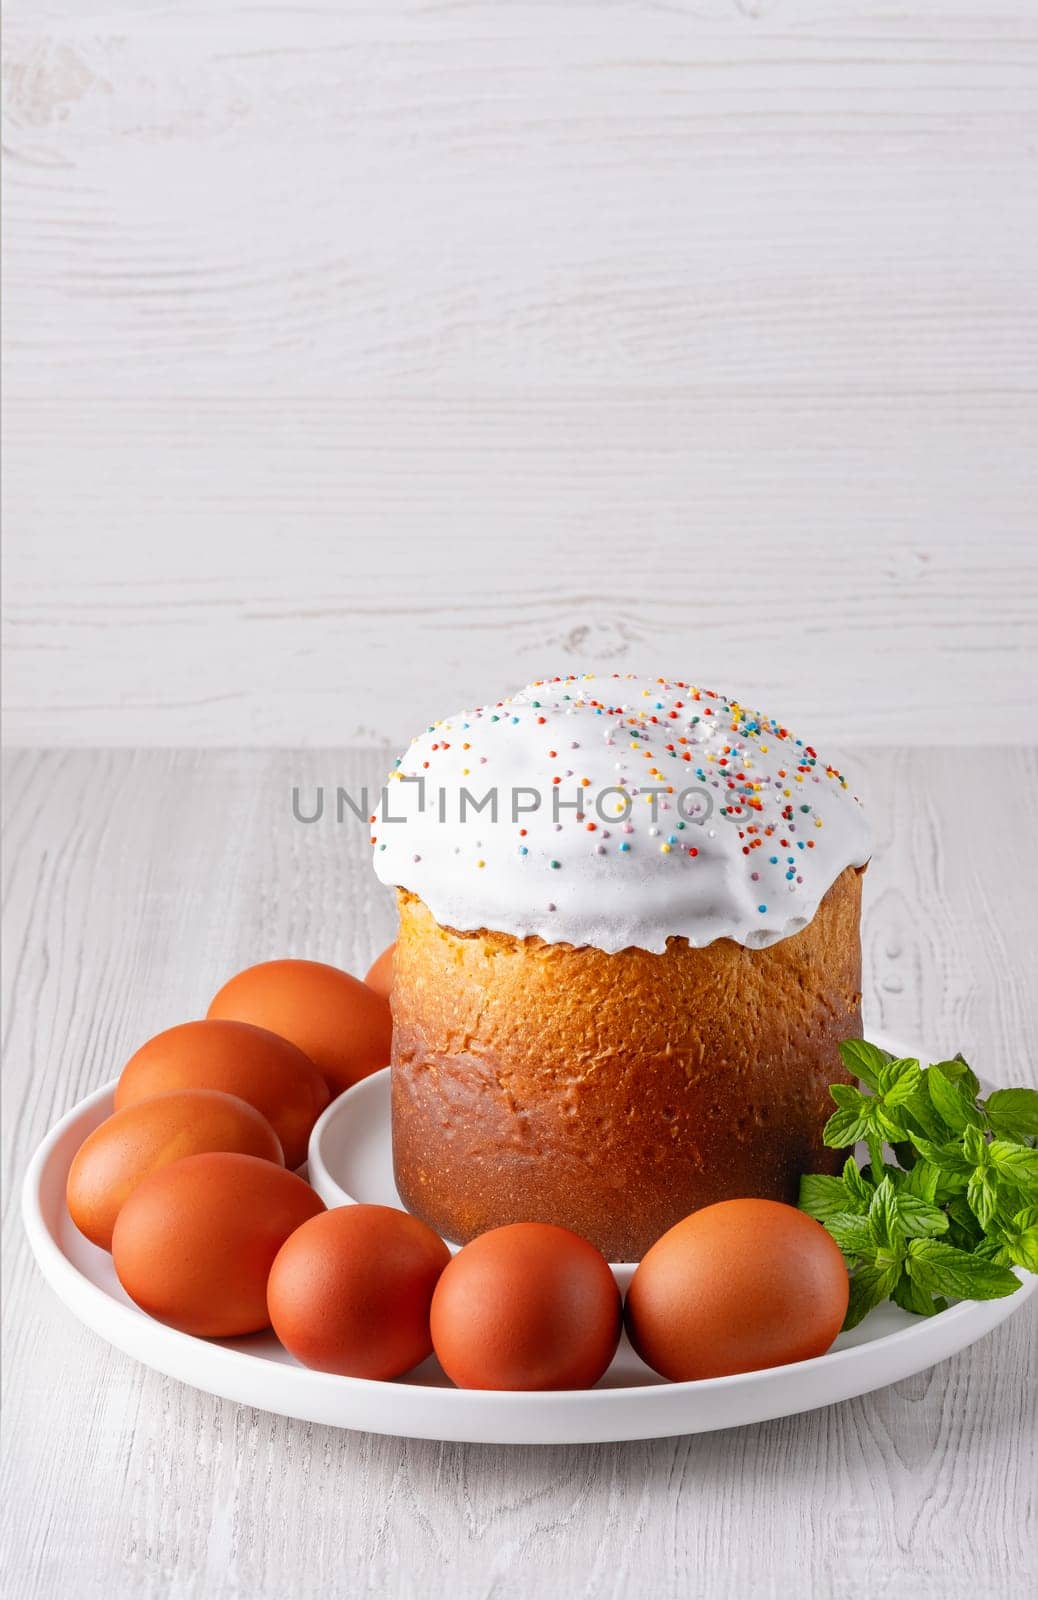 Delicious Easter cake and eggs on light background, with copy space for text by NataliPopova